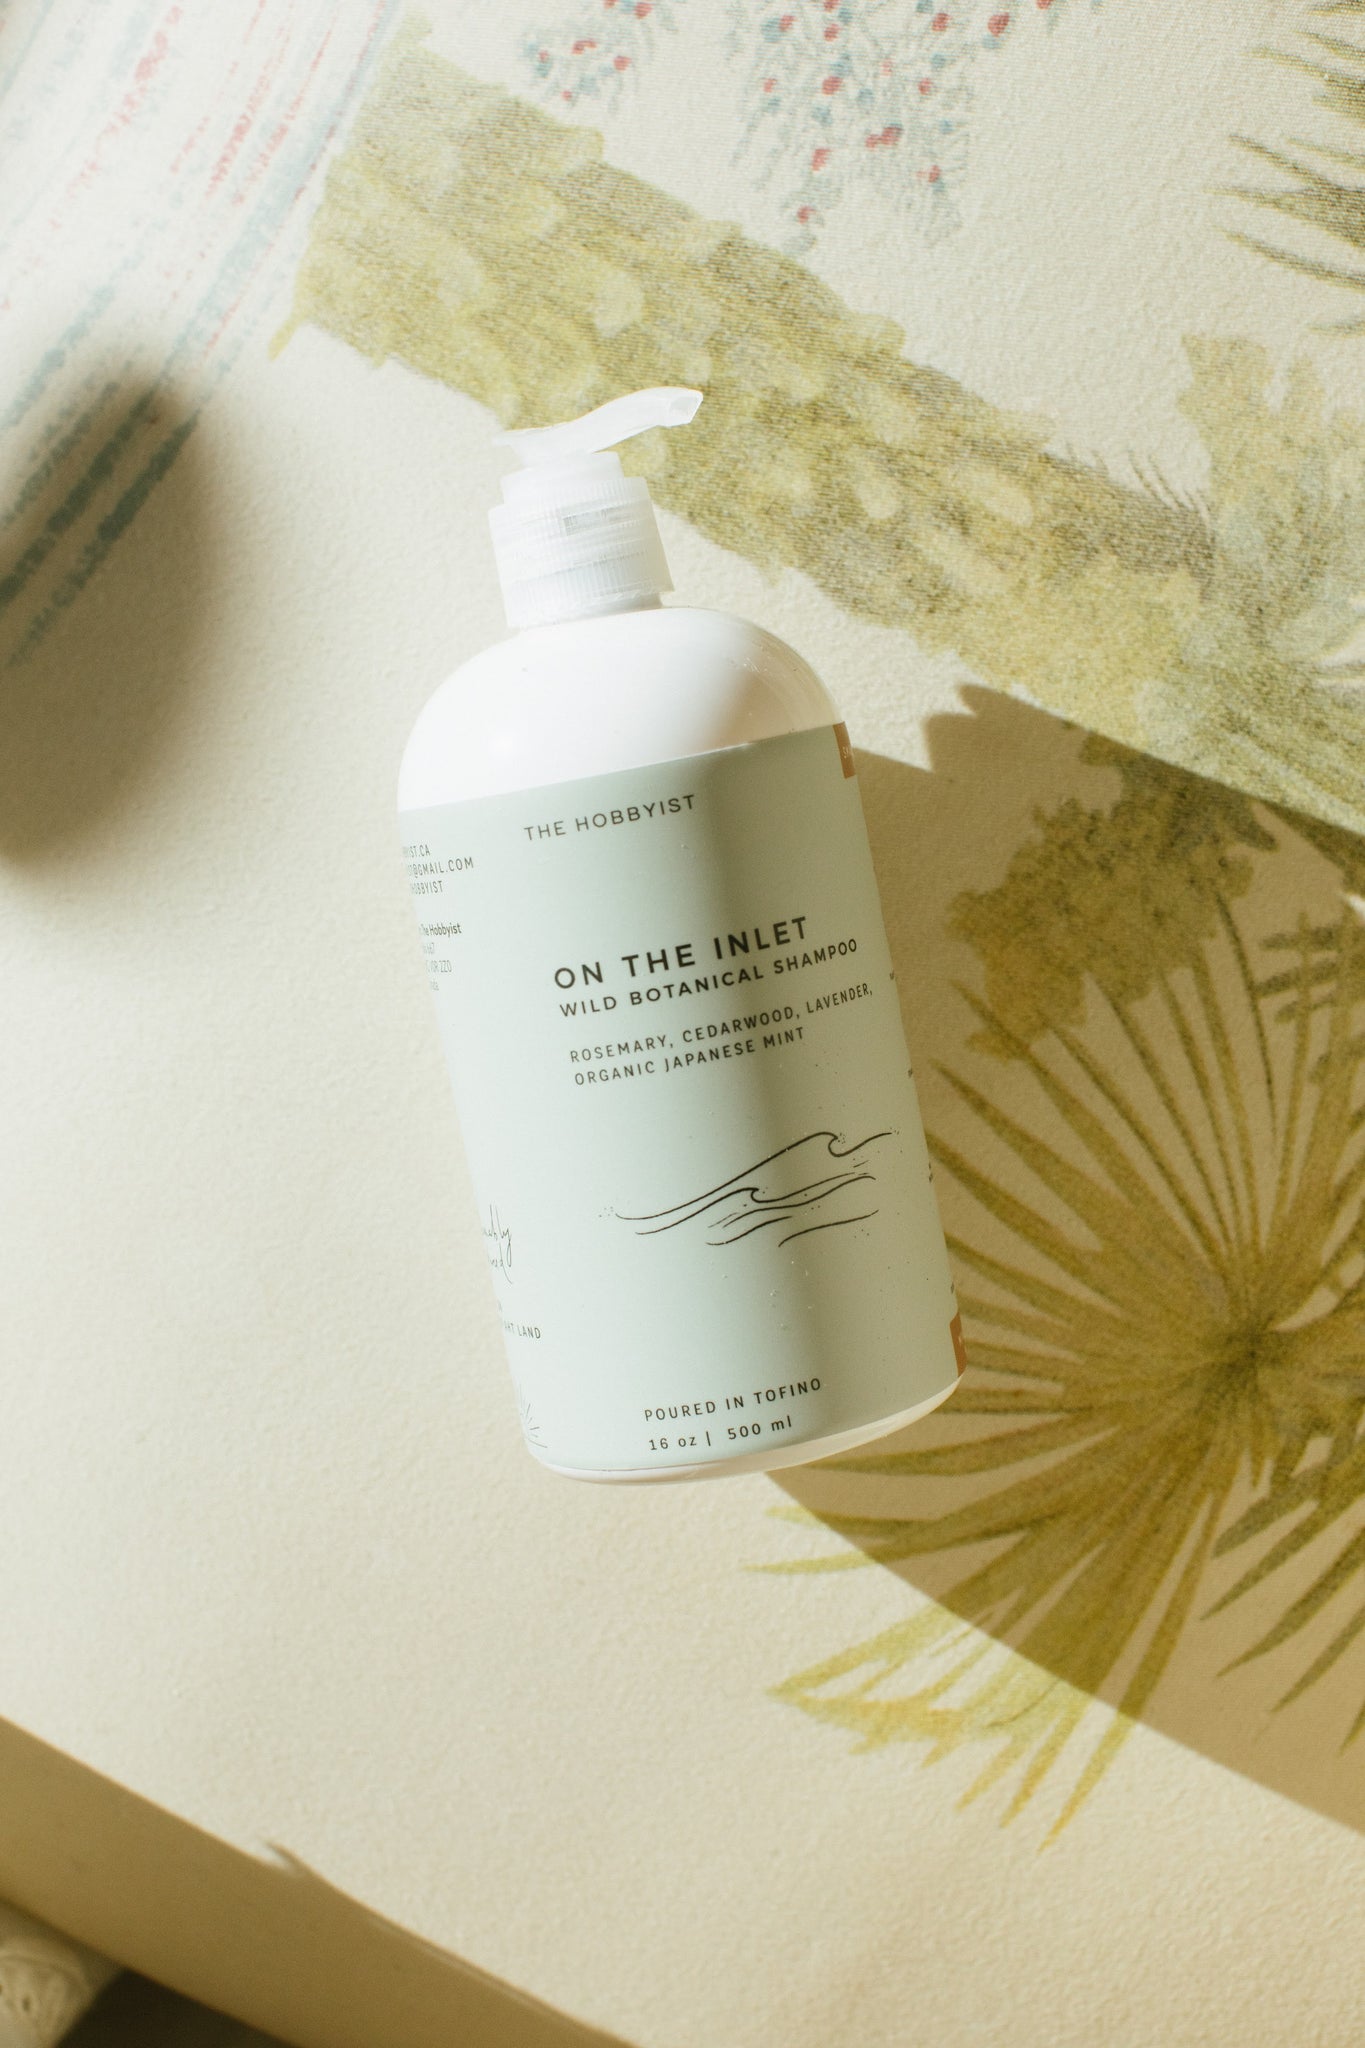 On the Inlet Shampoo | Botanical Hair Care Collection